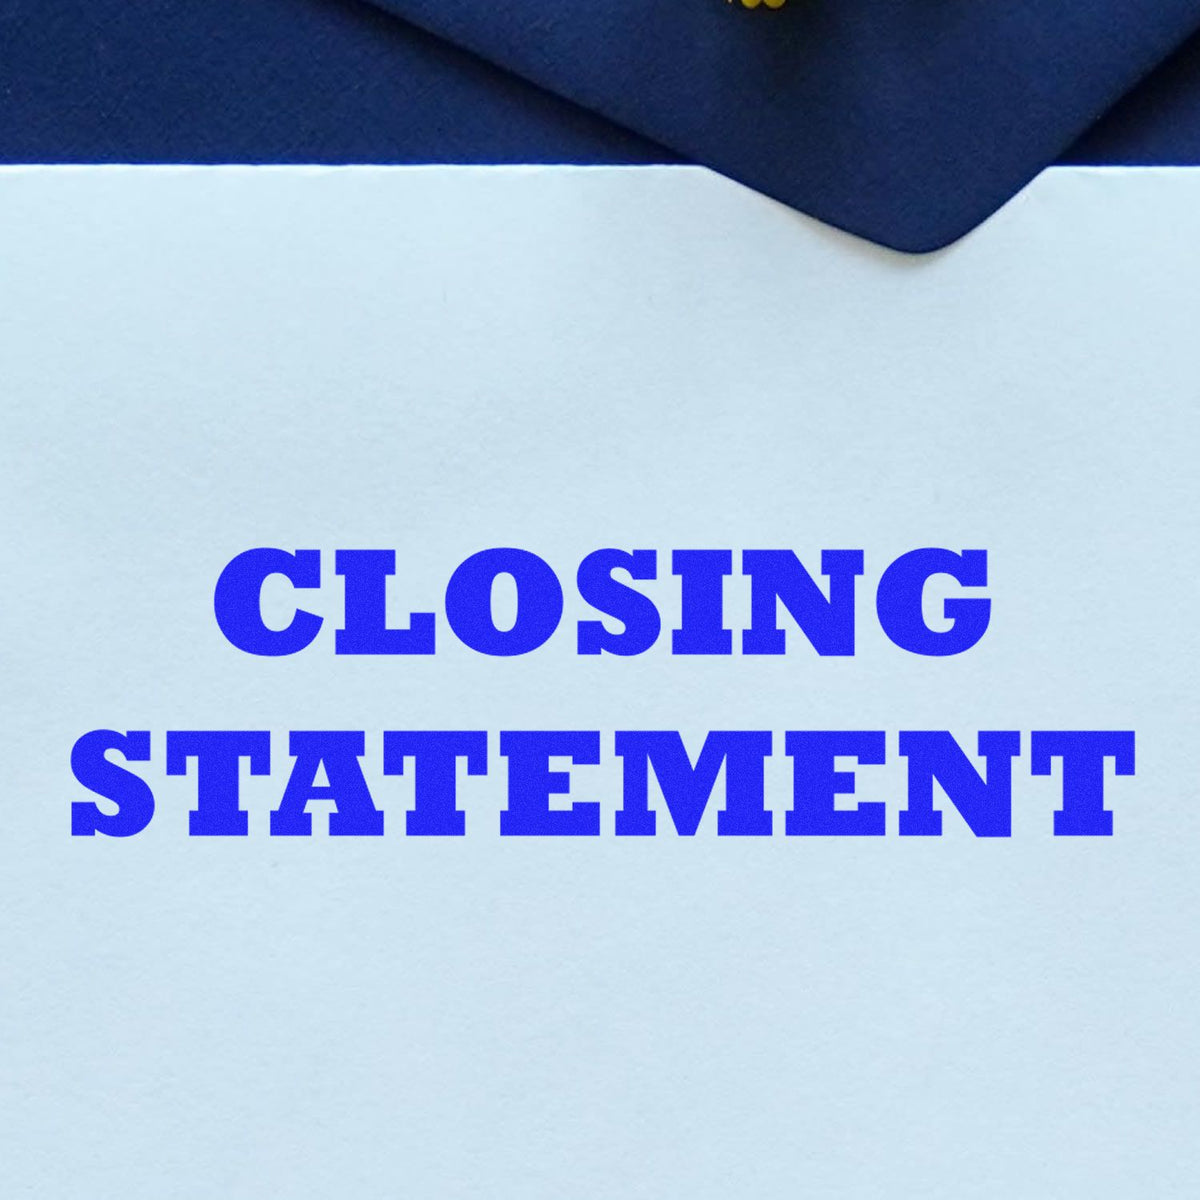 Large Self-Inking Closing Statement Stamp In Use Photo